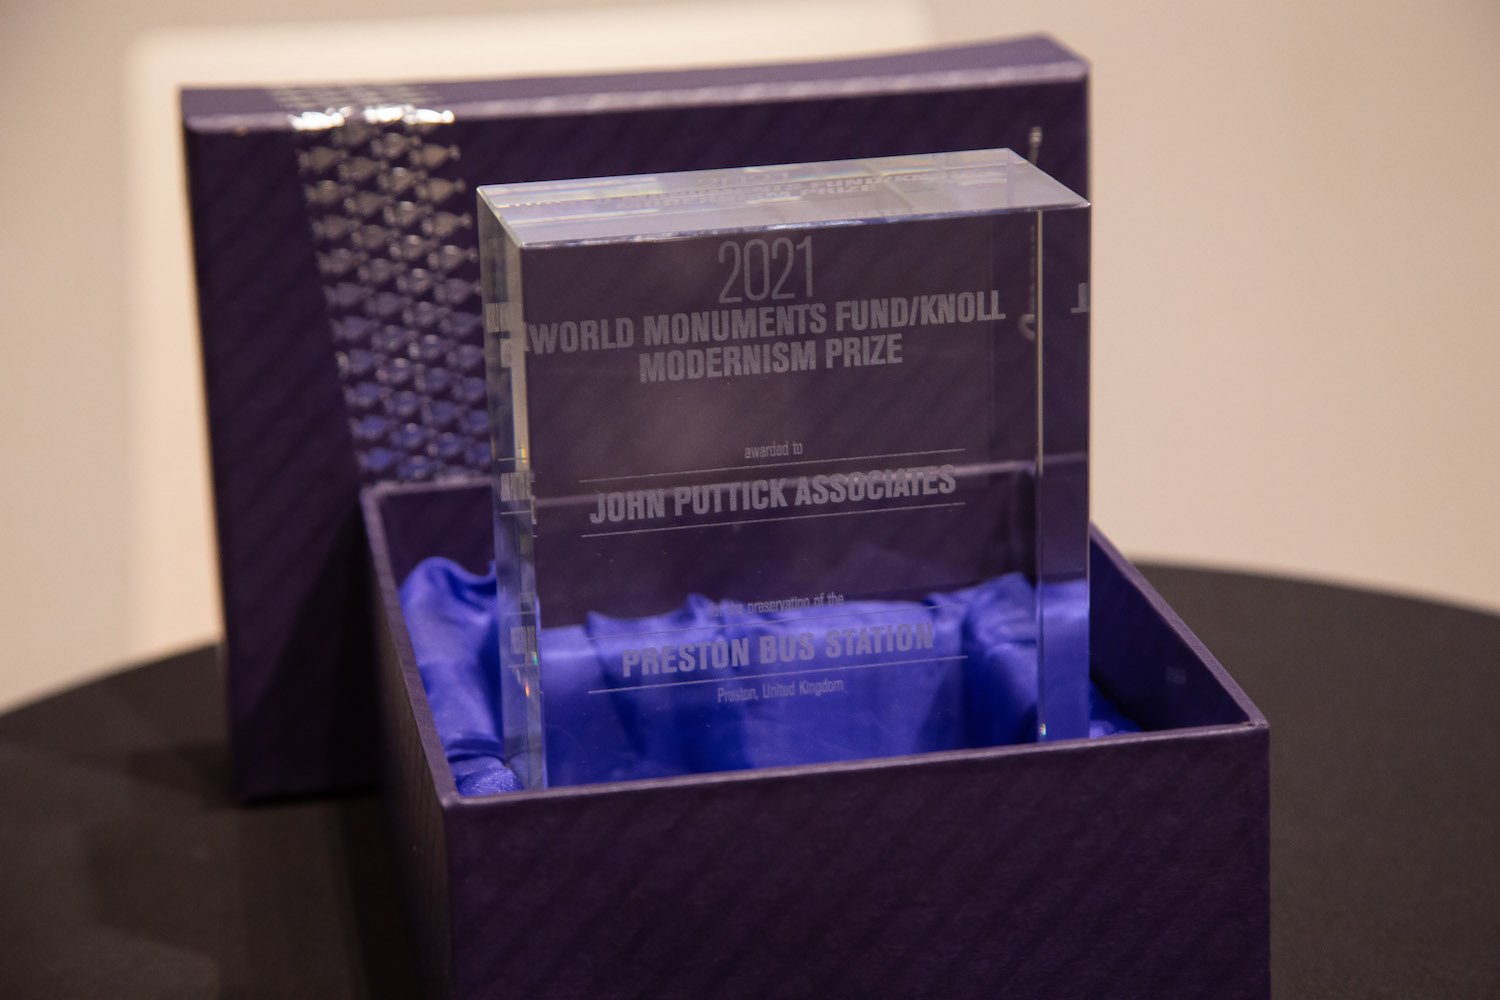 Close-up view of the award presented during the ceremony.